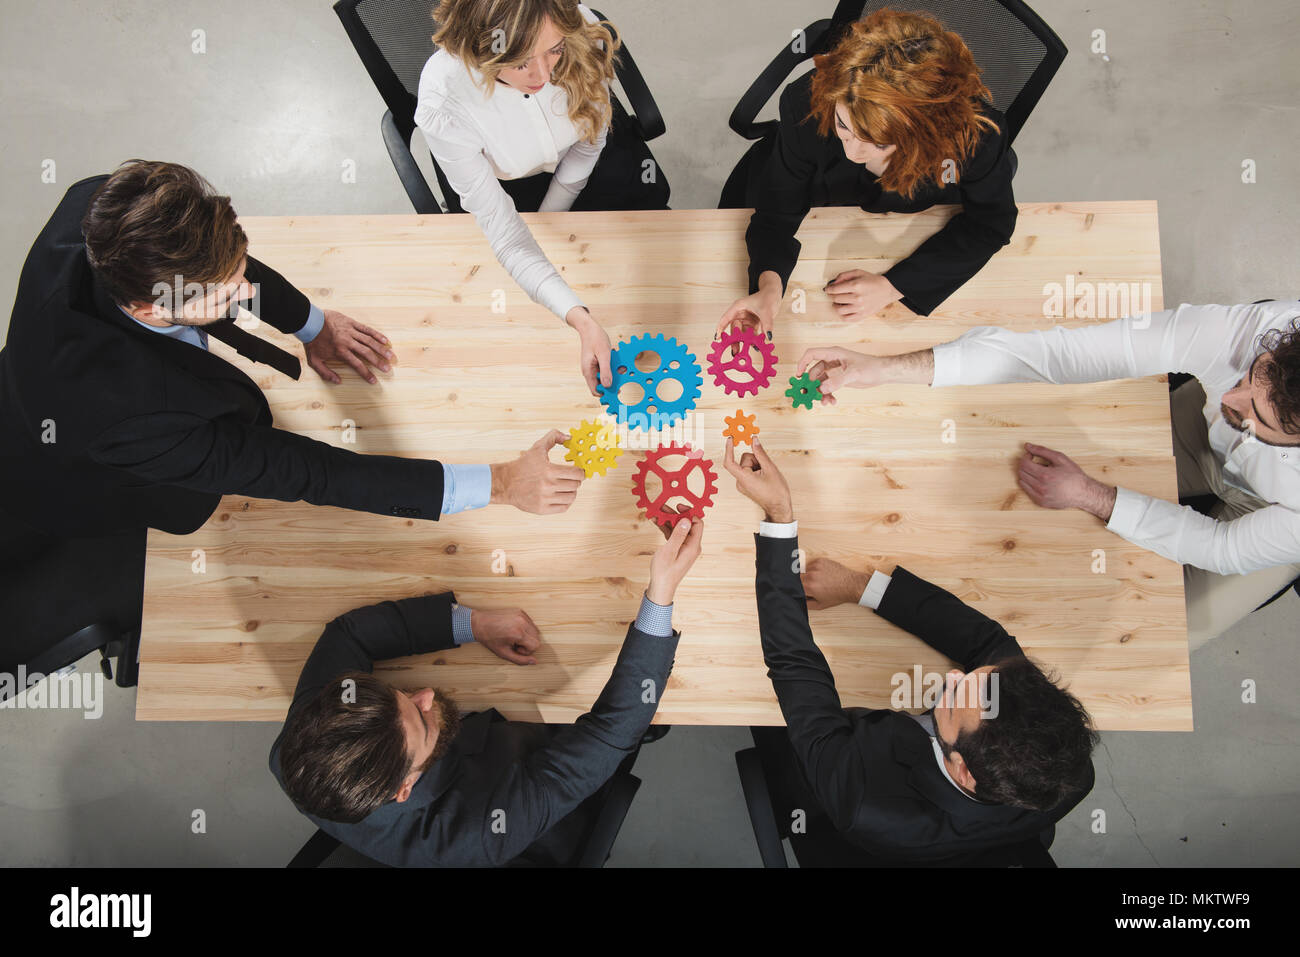 Business team connect pieces of gears. Teamwork, partnership and integration concept Stock Photo